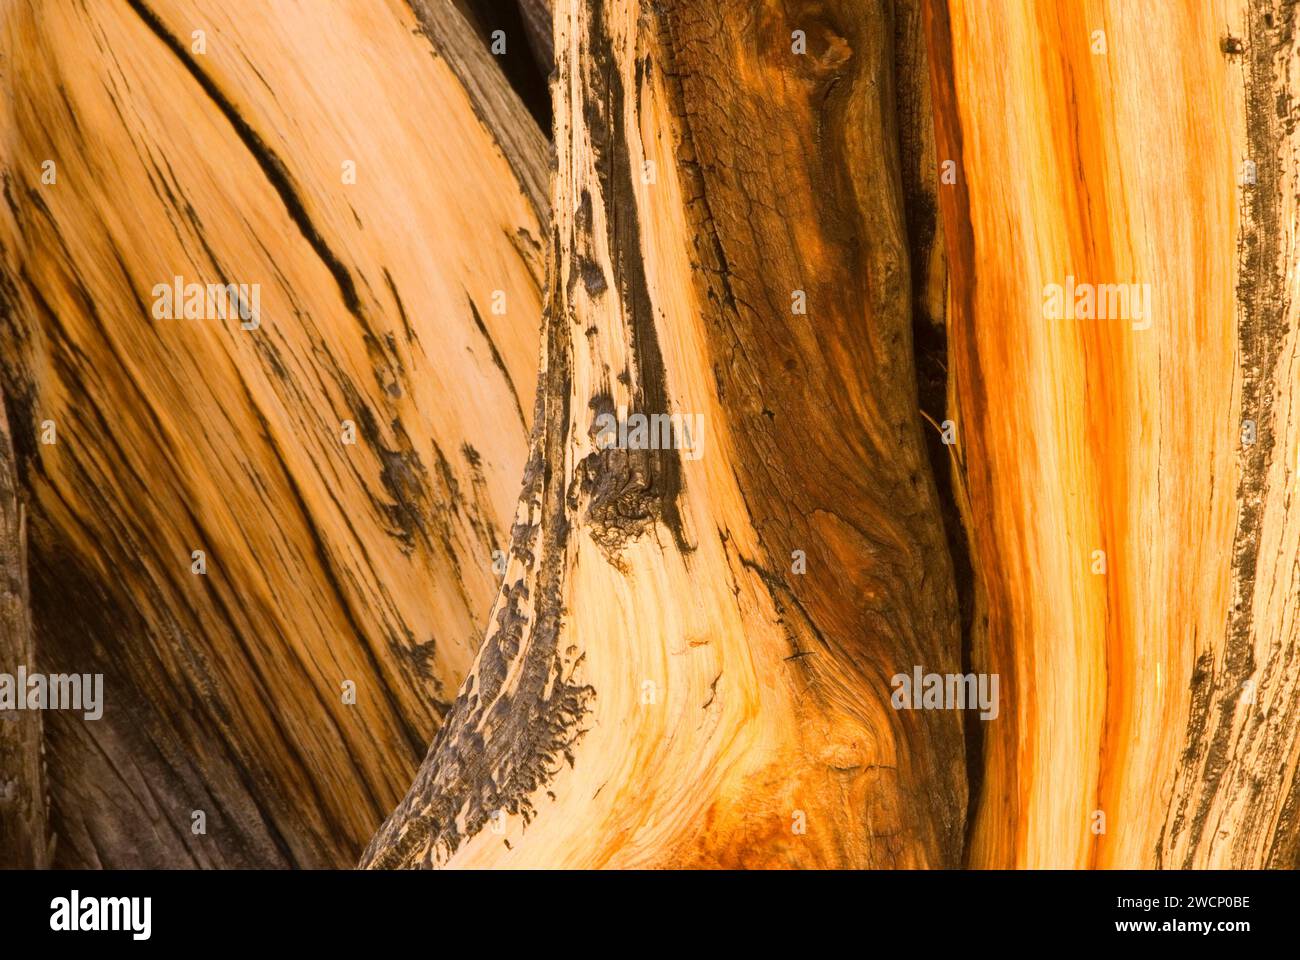 Bristlecone pine wood, Ancient Bristlecone Pine Forest, Ancient Bristlecone National Scenic Byway, Inyo National Forest, California Stock Photo